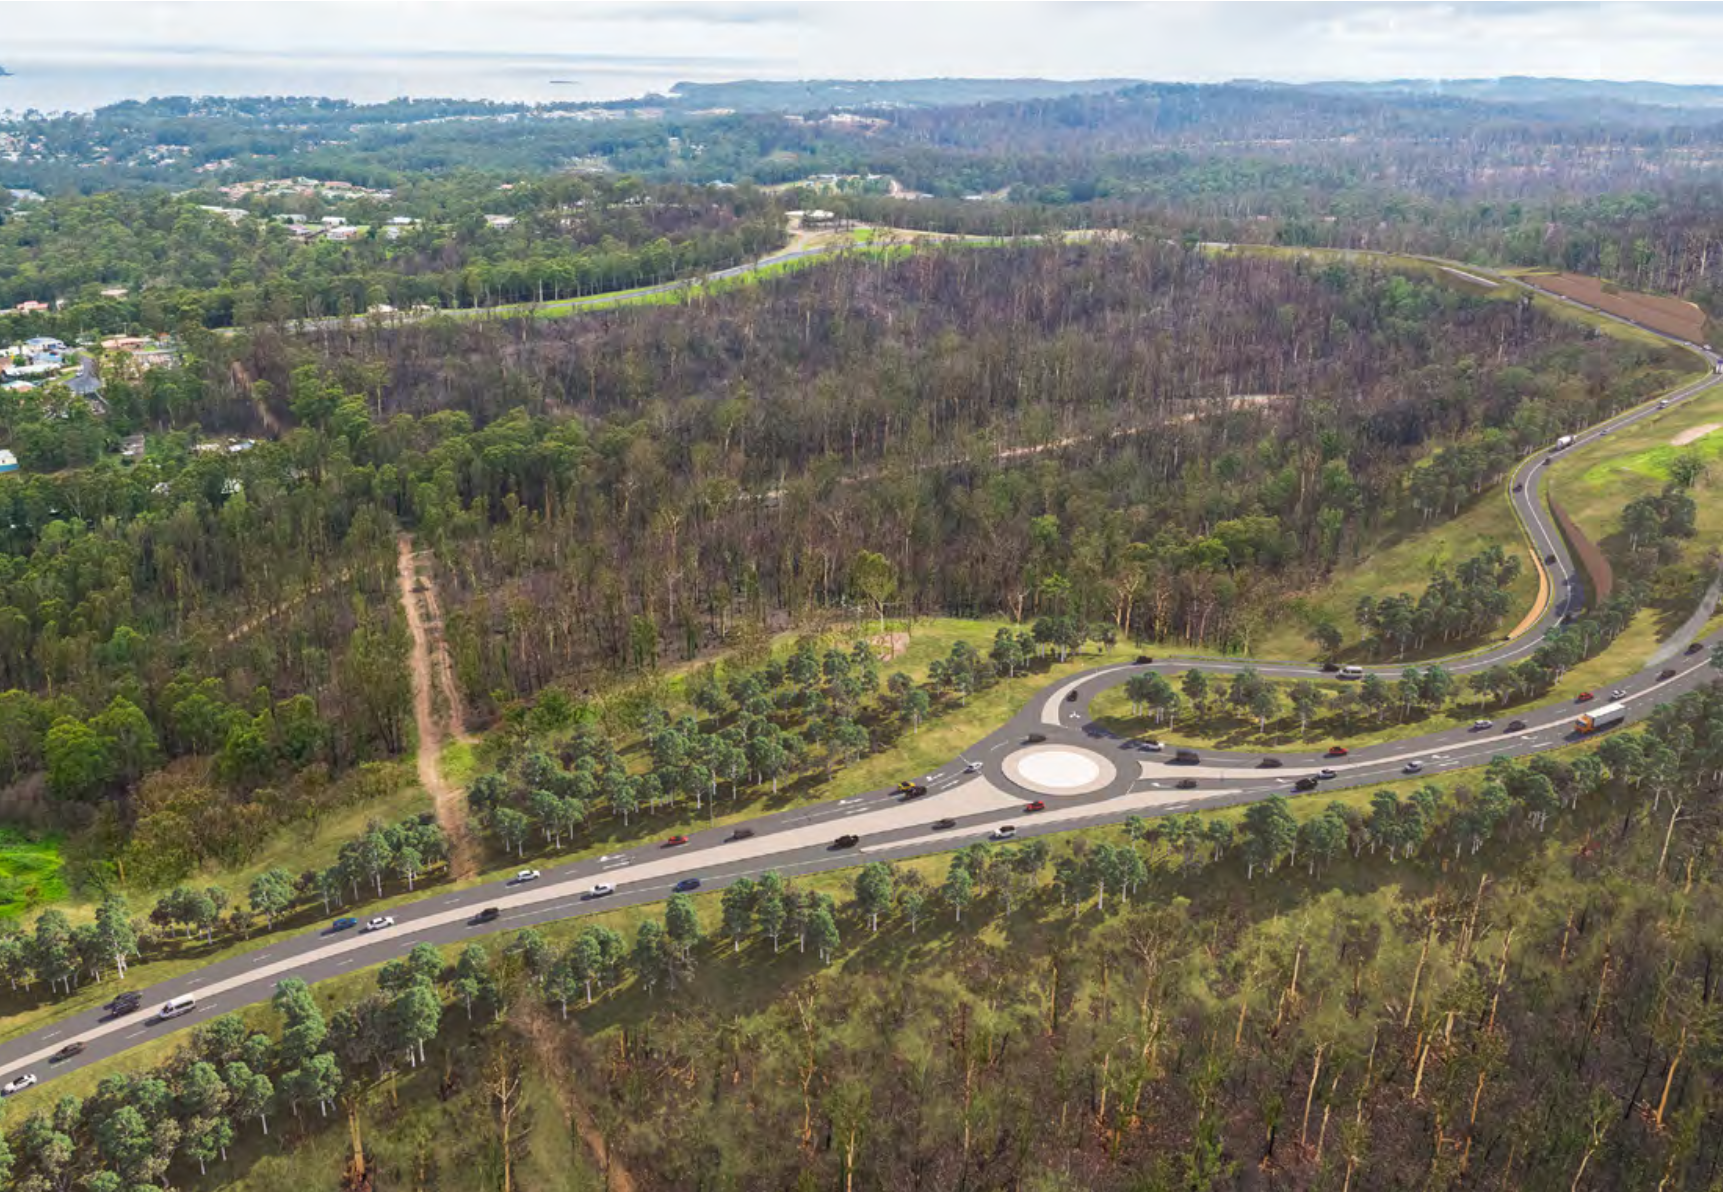 South Batemans Bay Link Road upgrades open for community consultation